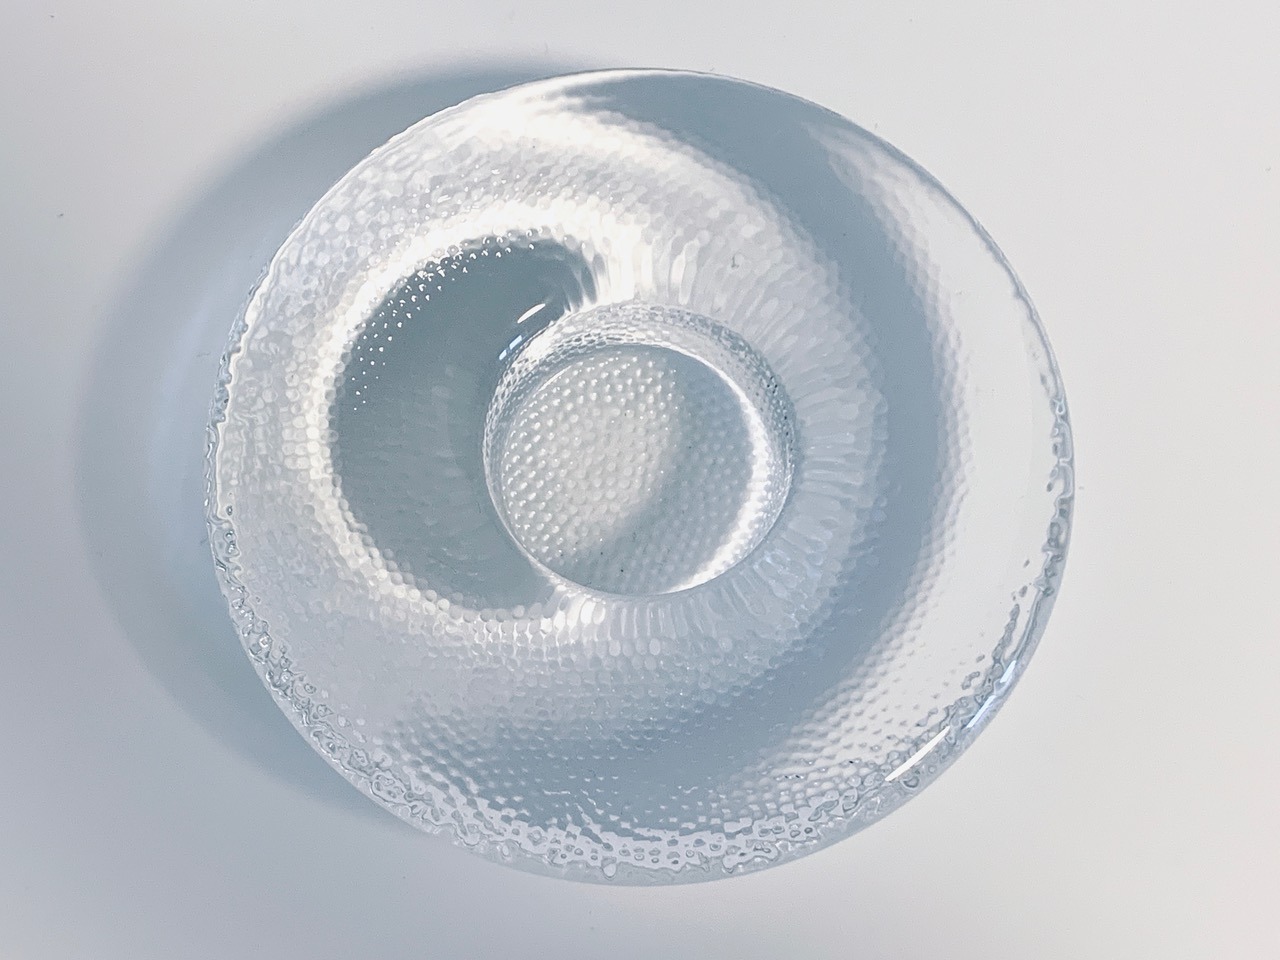 Image of the Iittala Nappi tea light holder transparent offered in this advertisement.